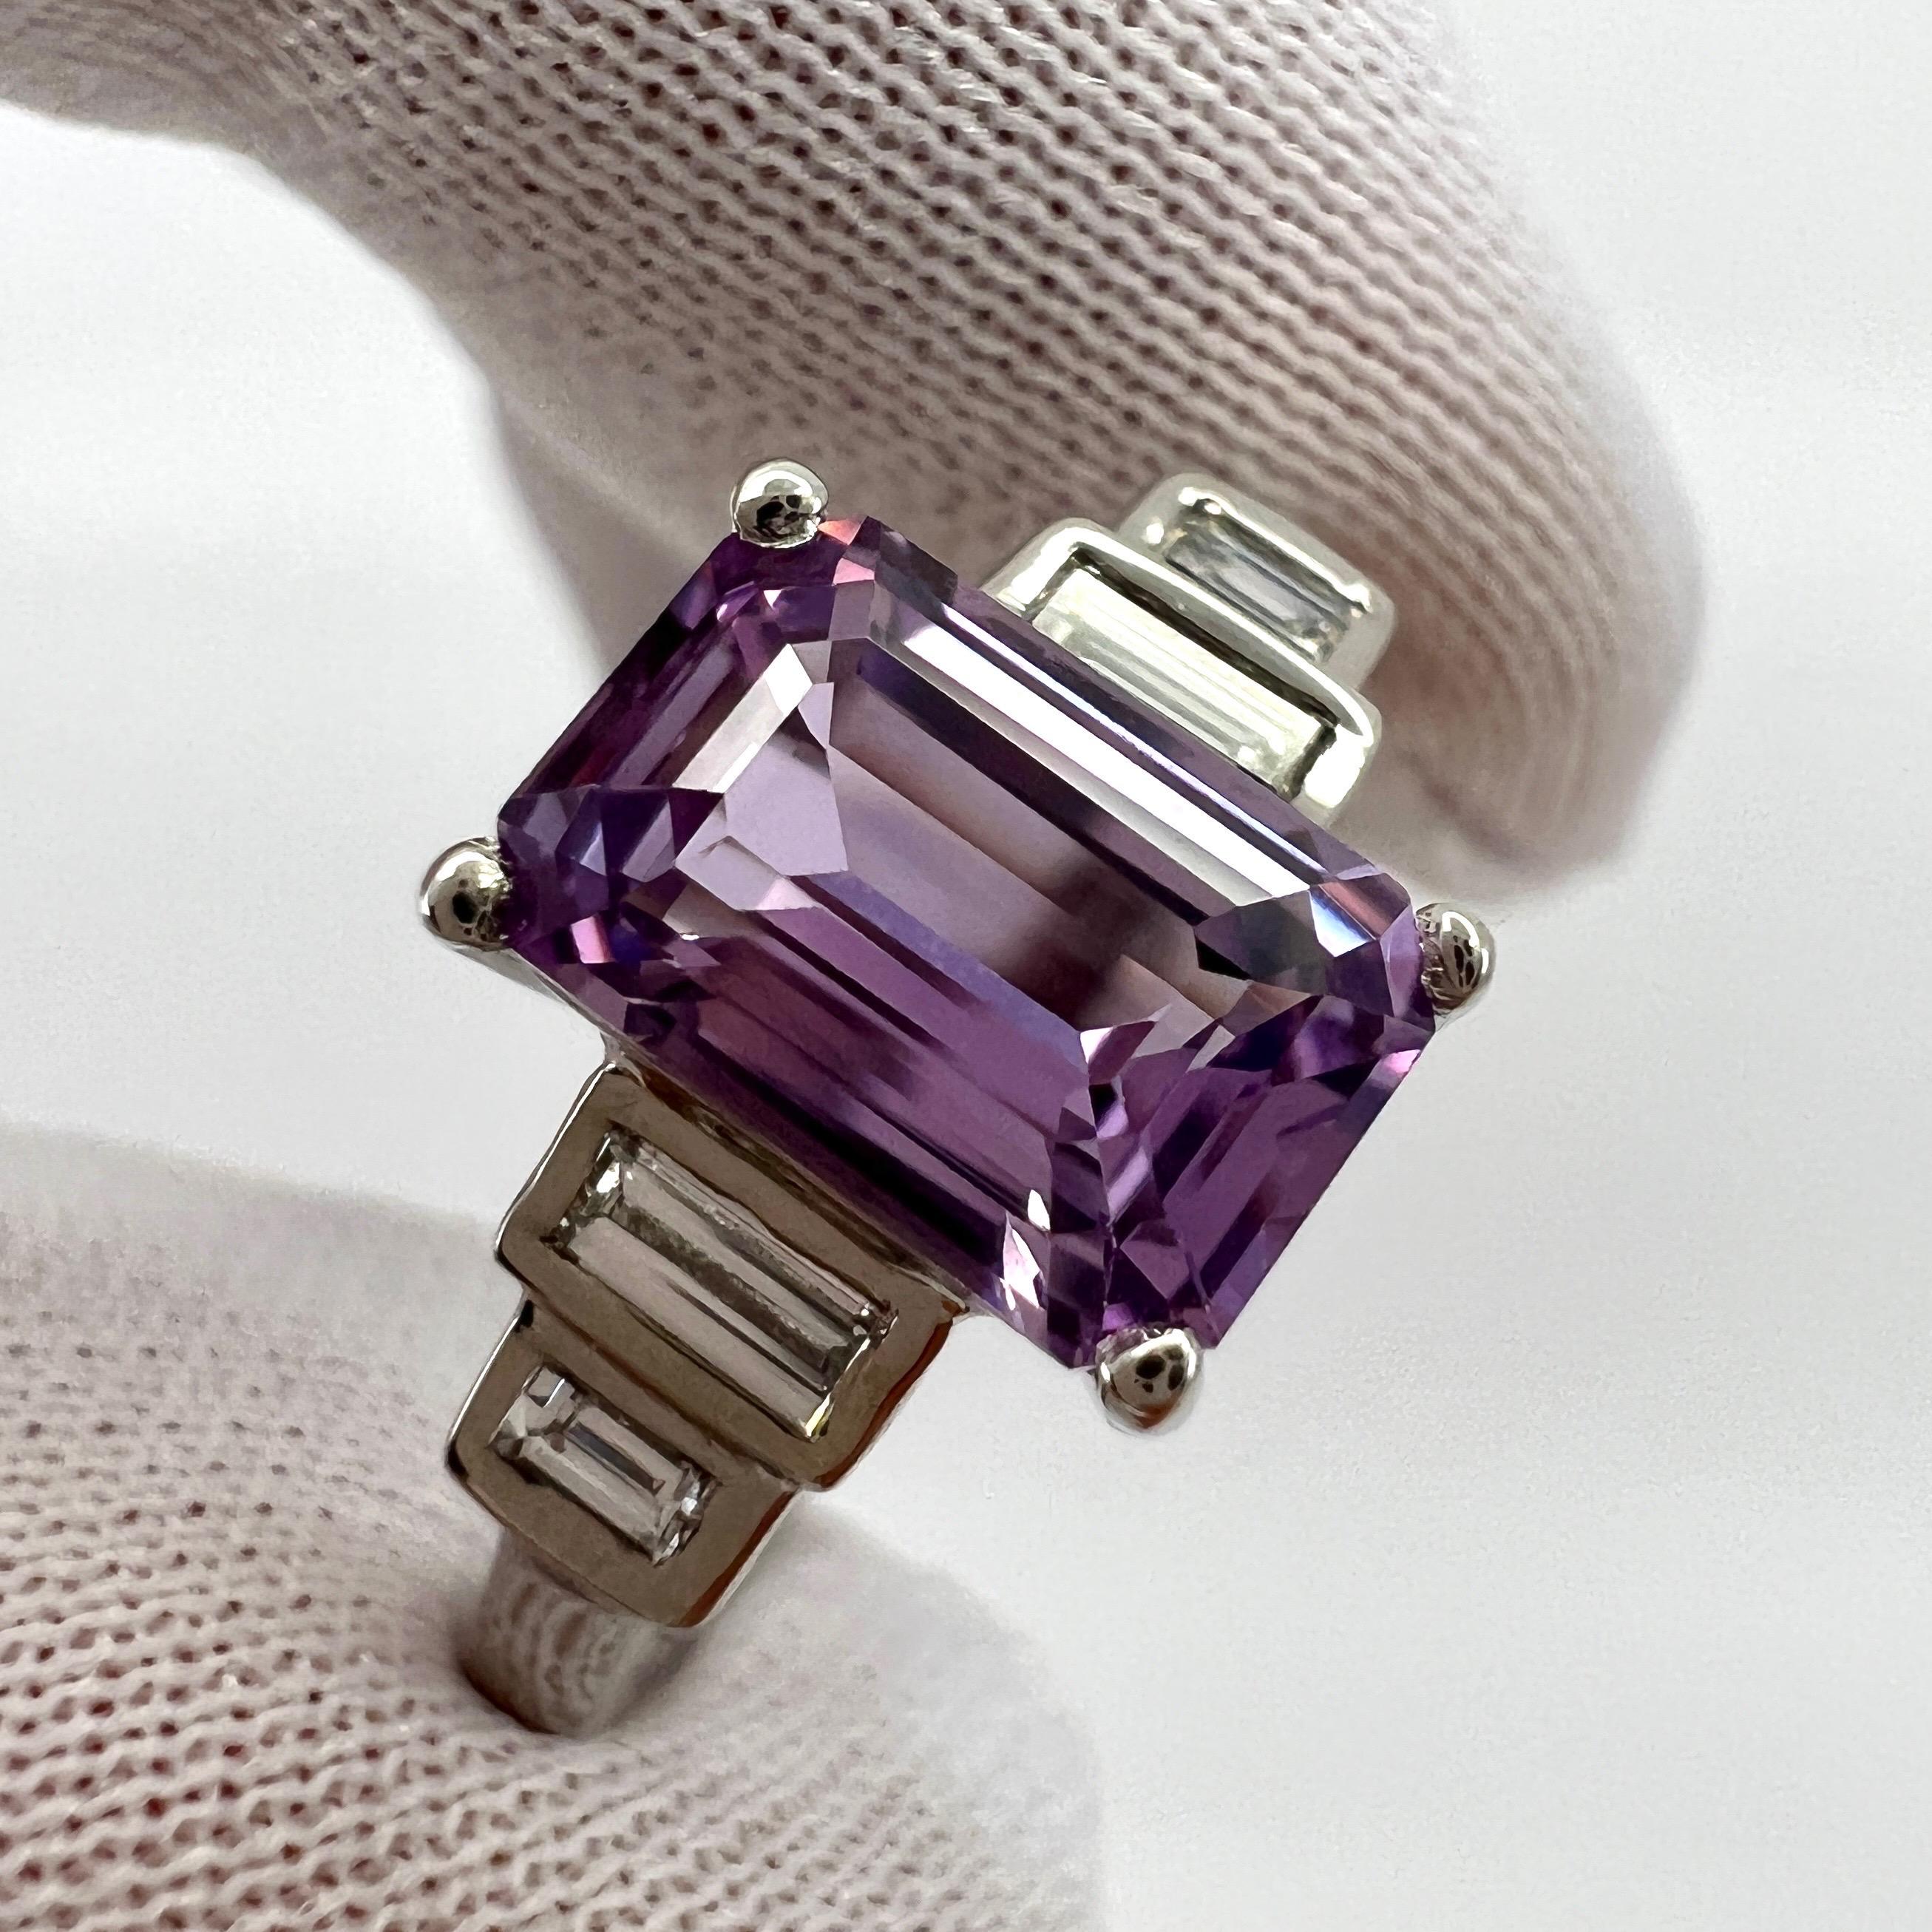 GIA Certified Untreated Purple Pink Emerald Cut Sapphire And Baguette Cut Diamond Art Deco Ring.

1.69 Carat sapphire with a beautiful pinkish purple colour and excellent clarity. Fully certified by GIA as natural and untreated and unheated. Very